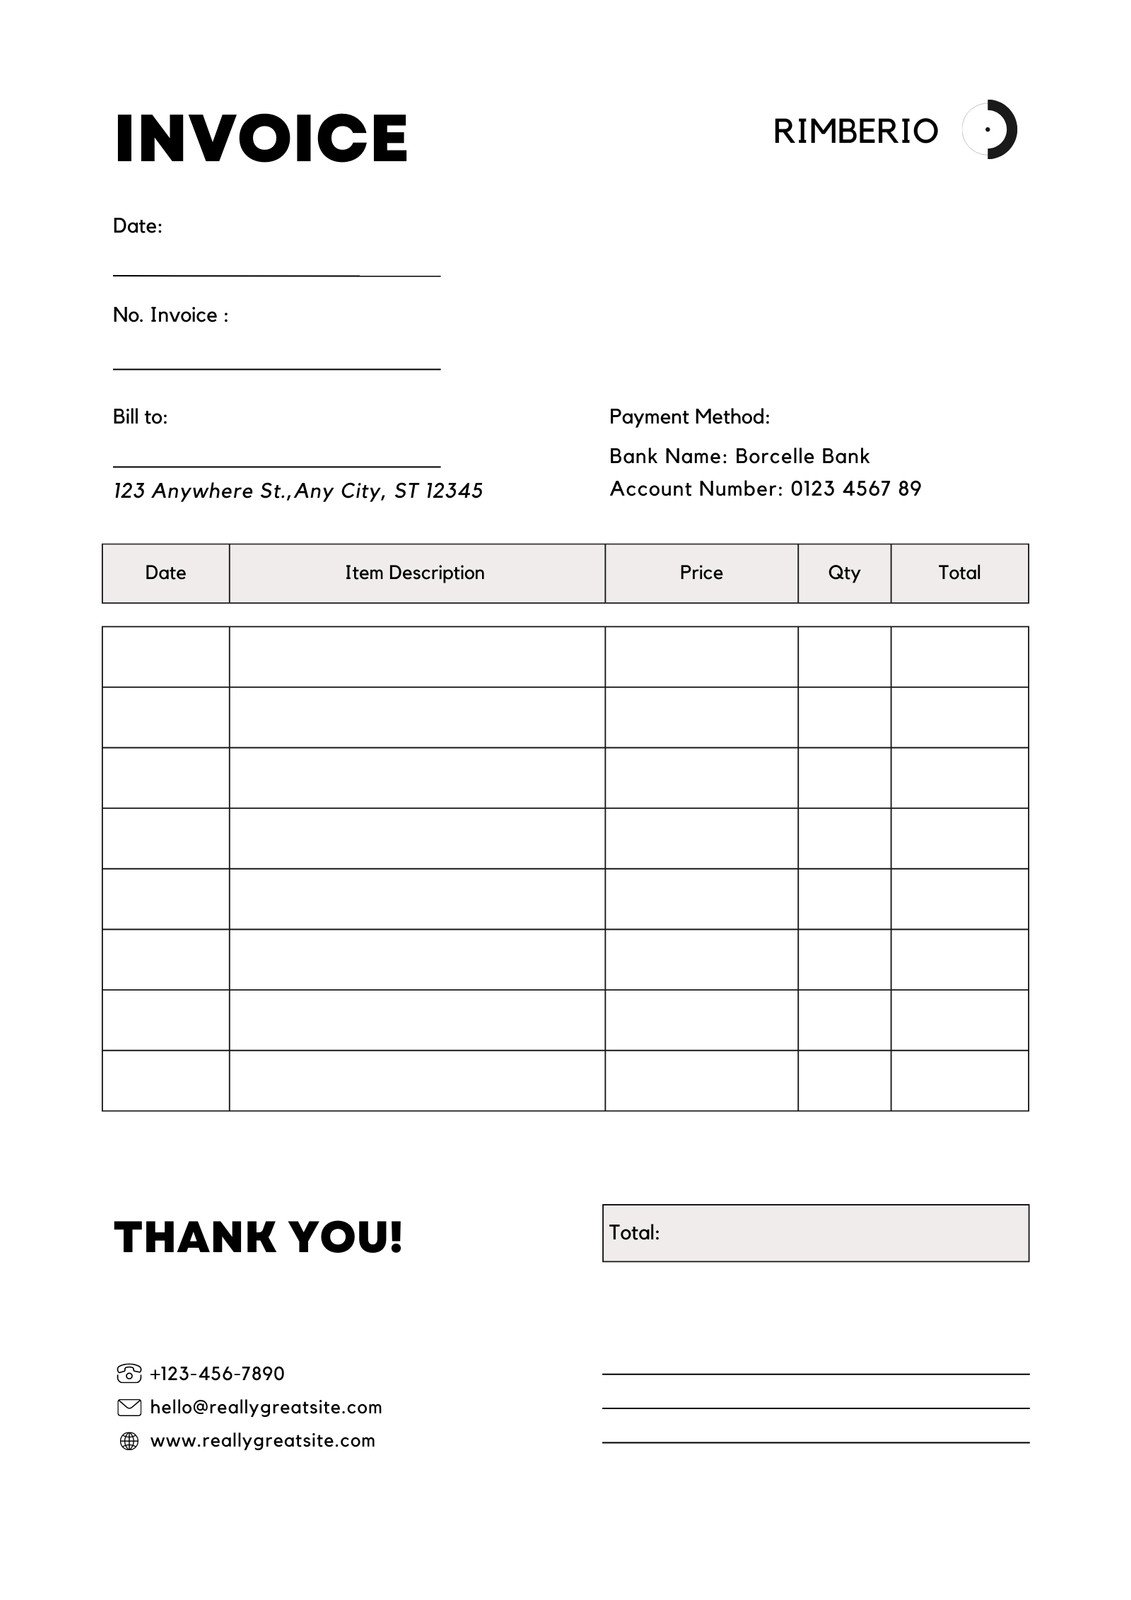 White and Beige Minimalist Professional Business Invoice